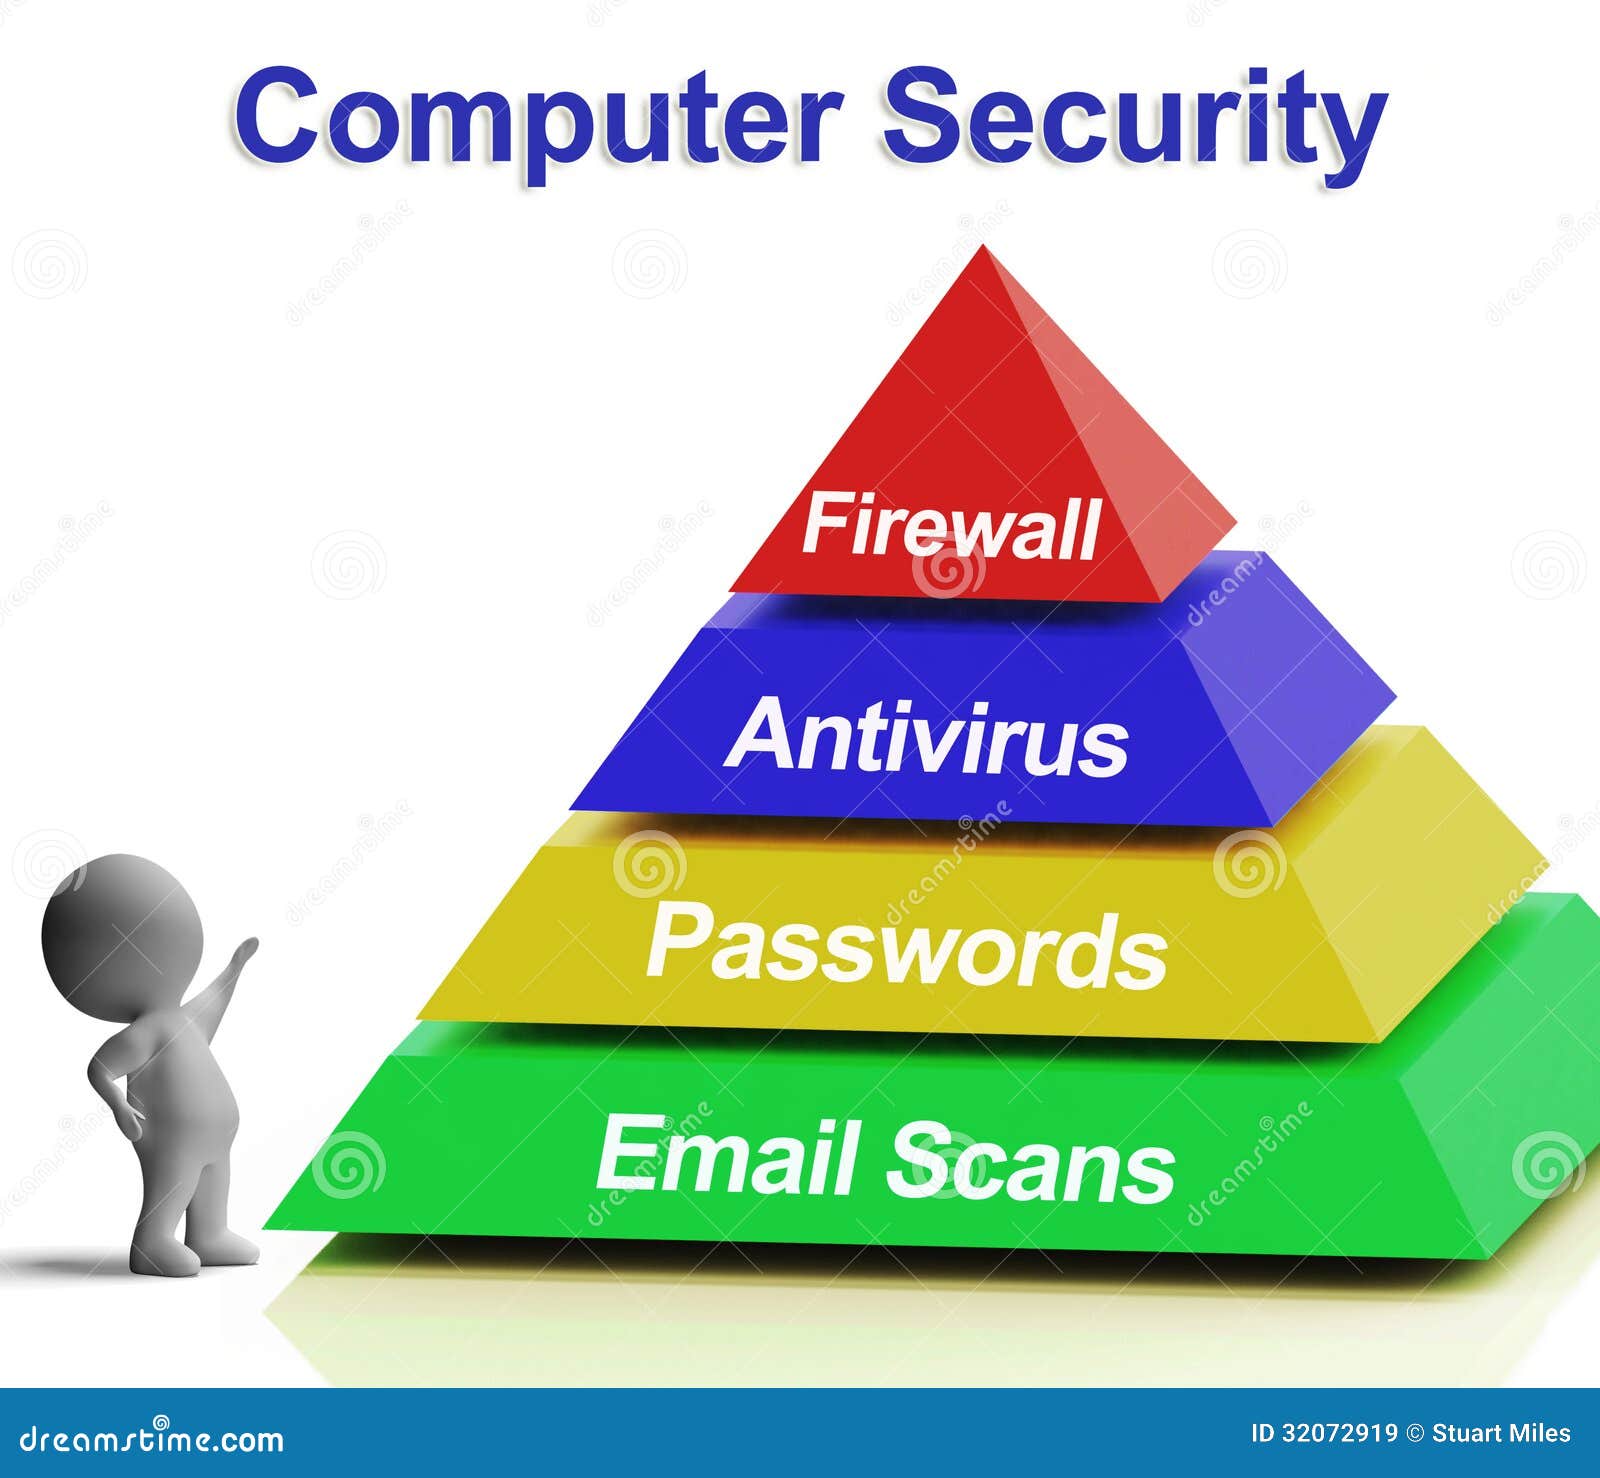 computer security clipart free - photo #49